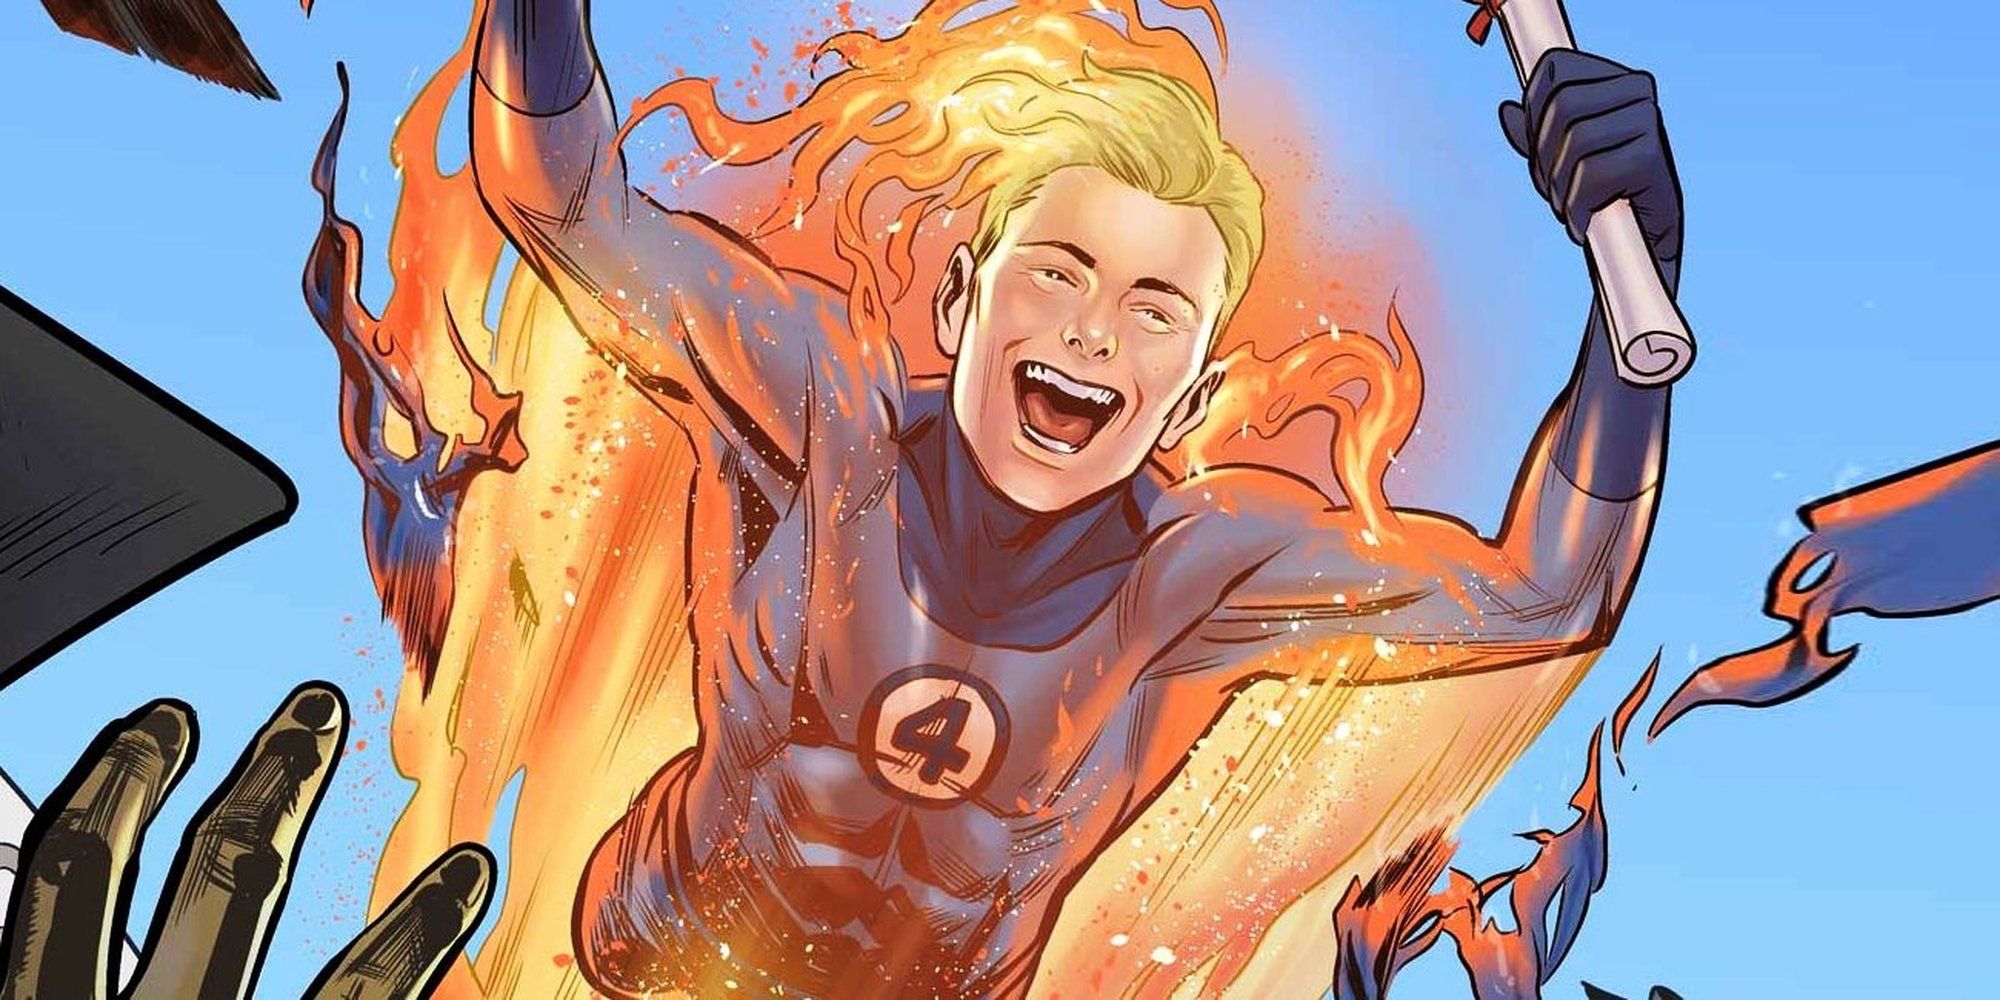 Human Torch flying while celebrating